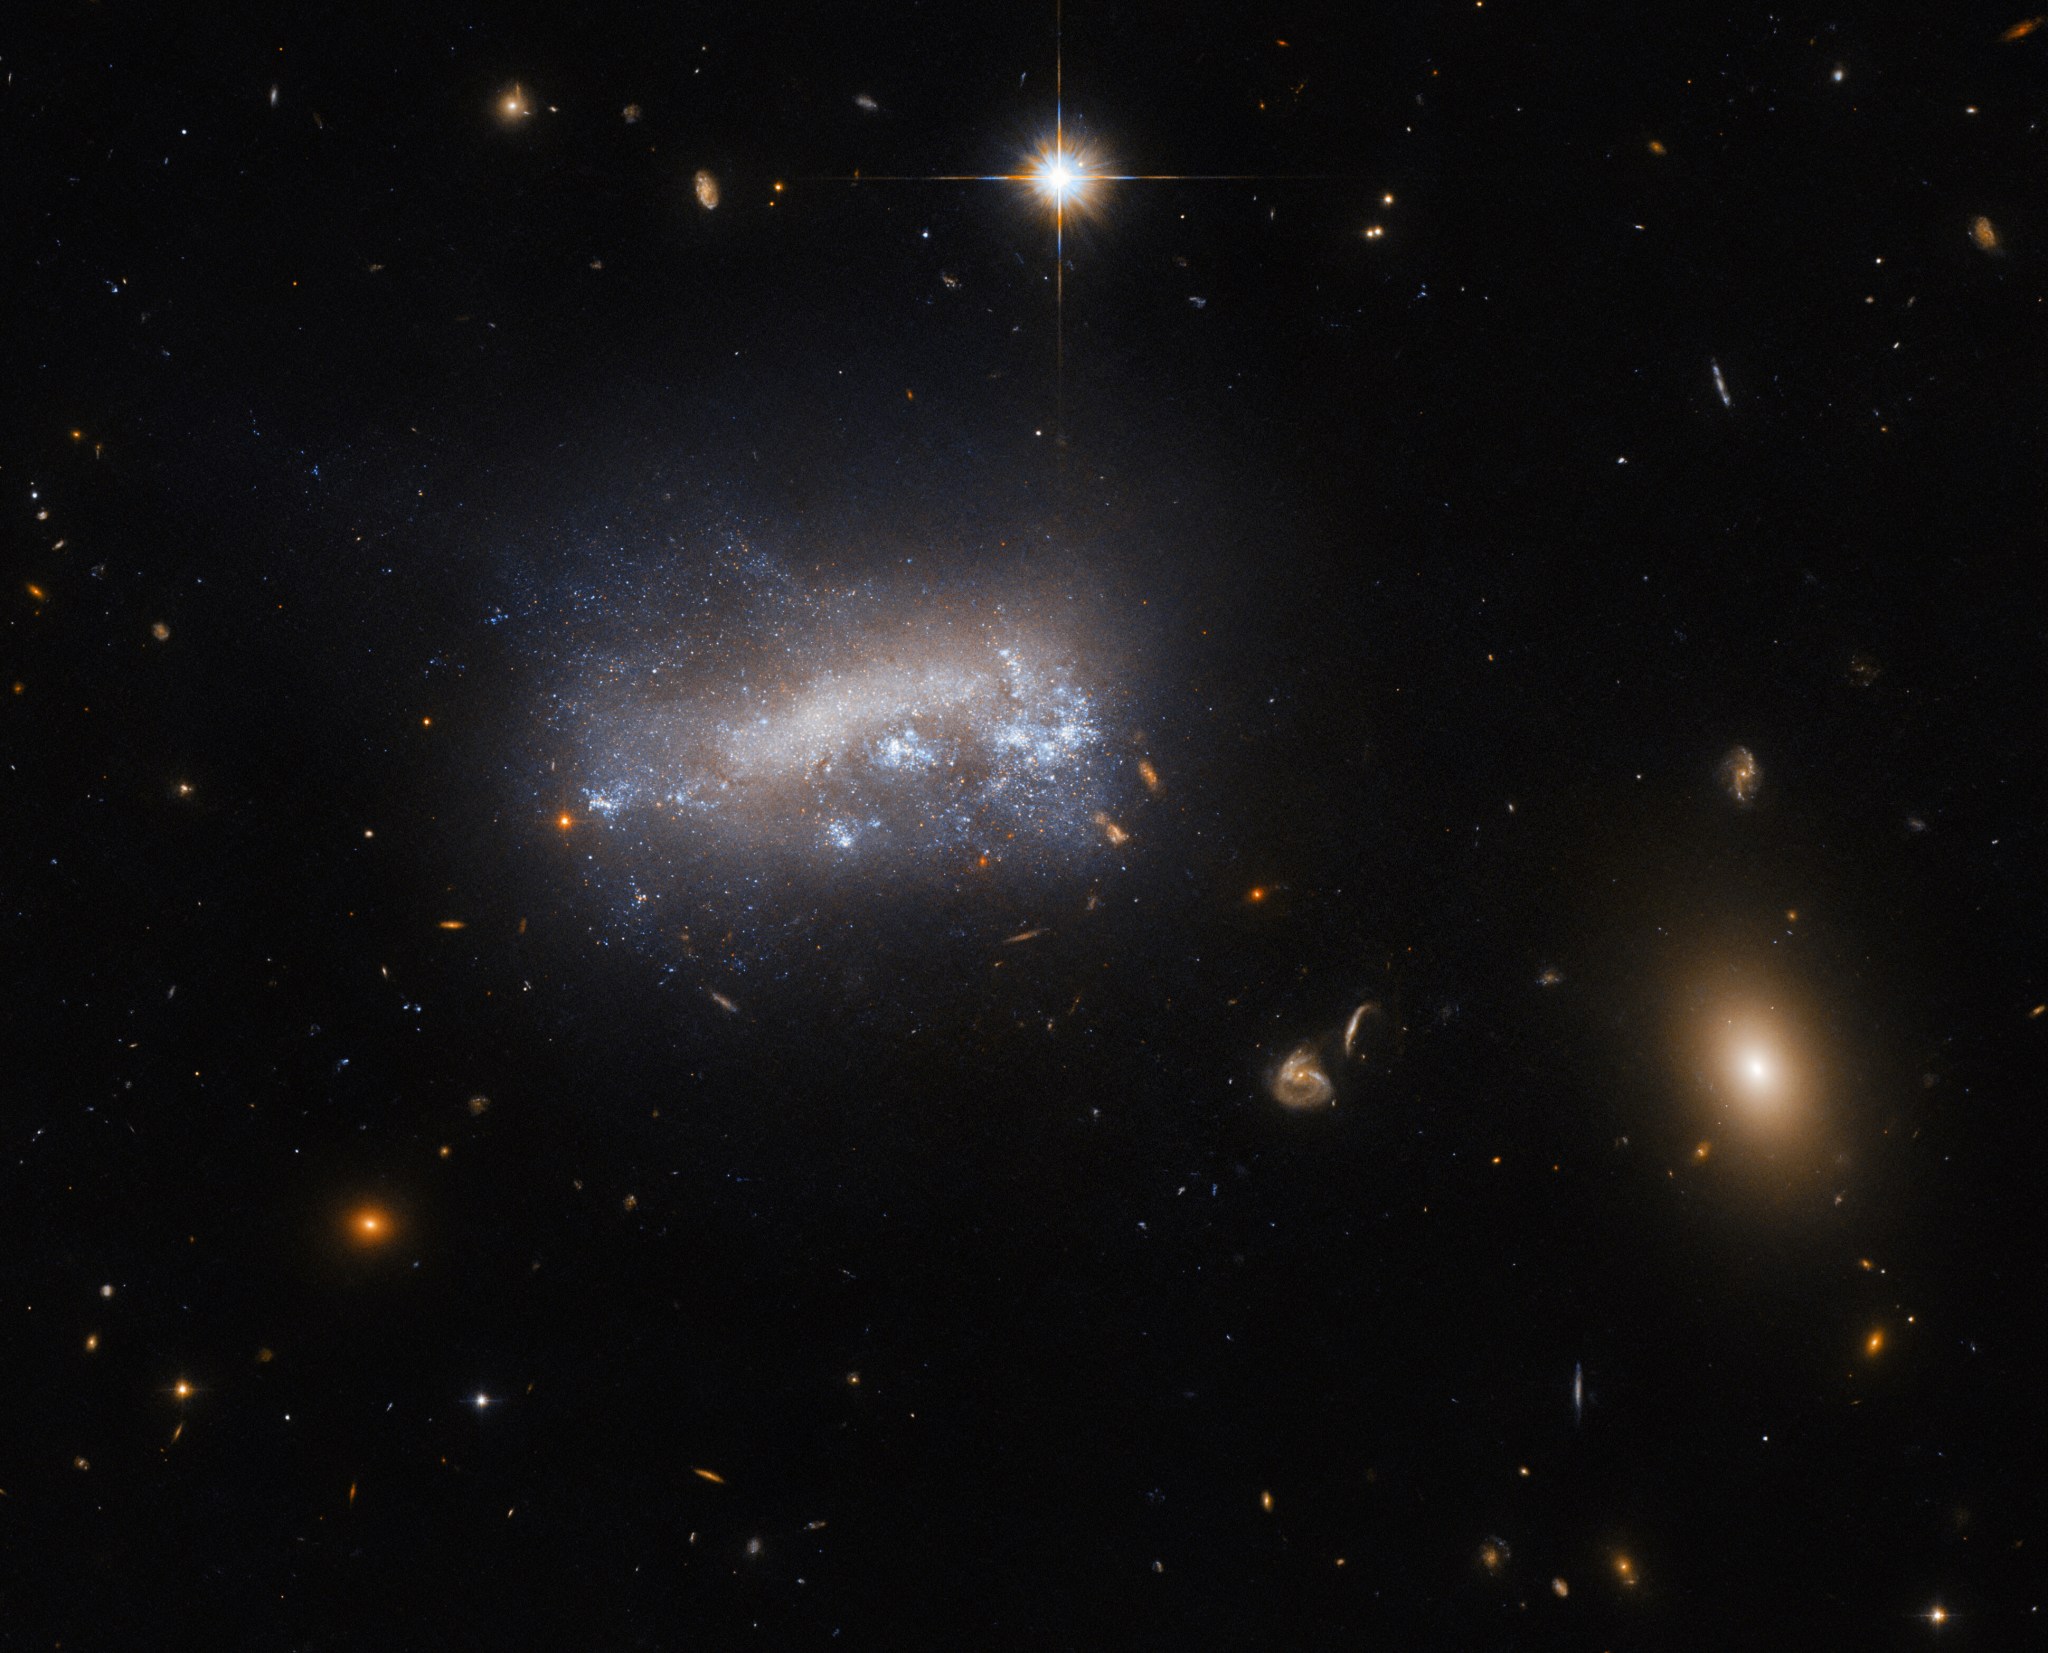 A distorted dwarf galaxy, obscured by dust and by bright outbursts caused by star formation, floats roughly in the center. Tendrils of gas stretch up from the plane of the galaxy. A few distant galaxies are visible in the background around it, many as little spirals, and also including a prominent elliptical galaxy. A bright star hangs above the galaxy in the foreground, marked by cross-shaped diffraction spikes. The galaxy appears in shades of white and blue, while the distant galaxies are spots of orange.